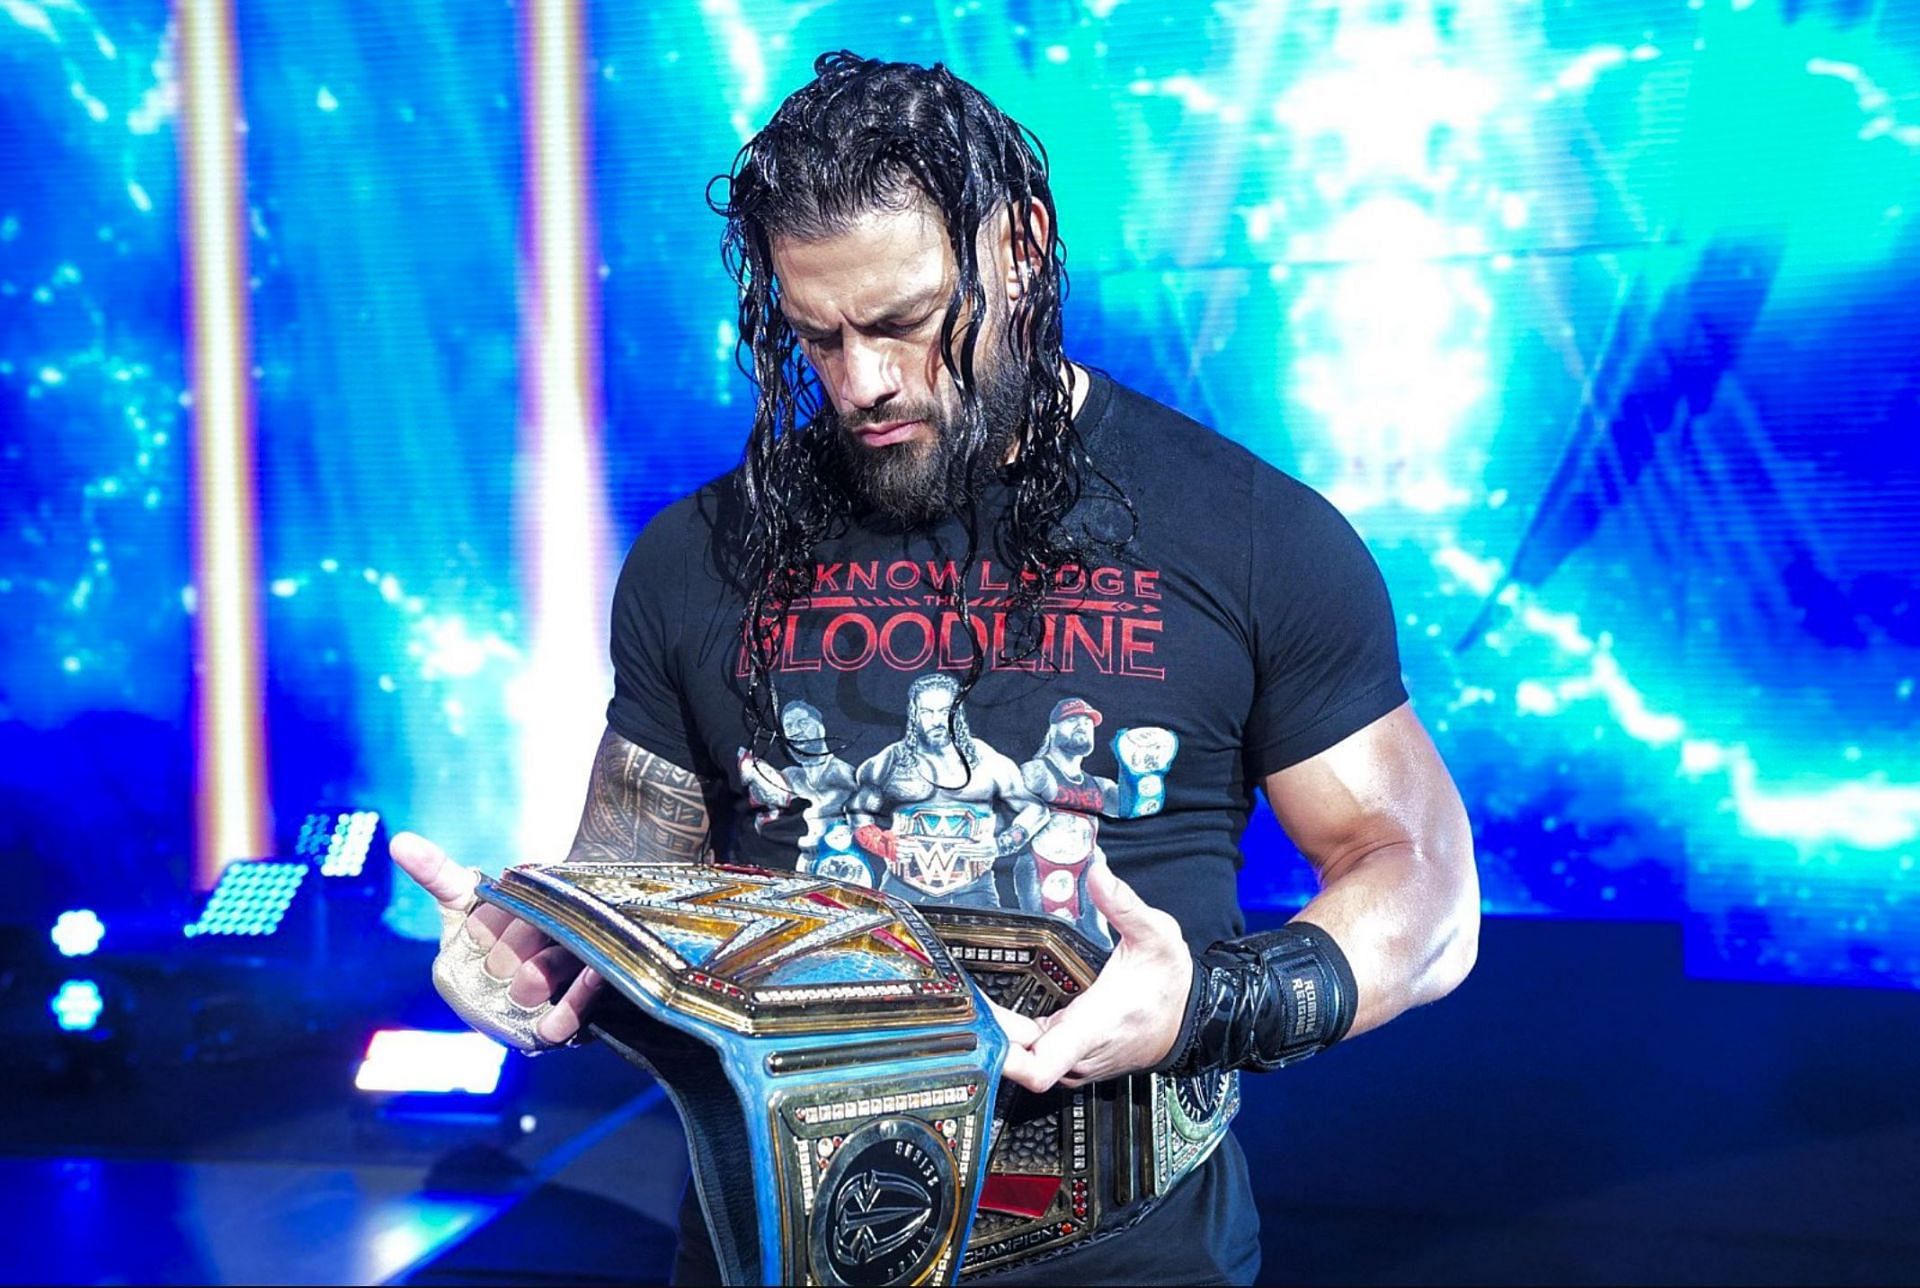 Roman Reigns has held the Universal Championship for over 700 days